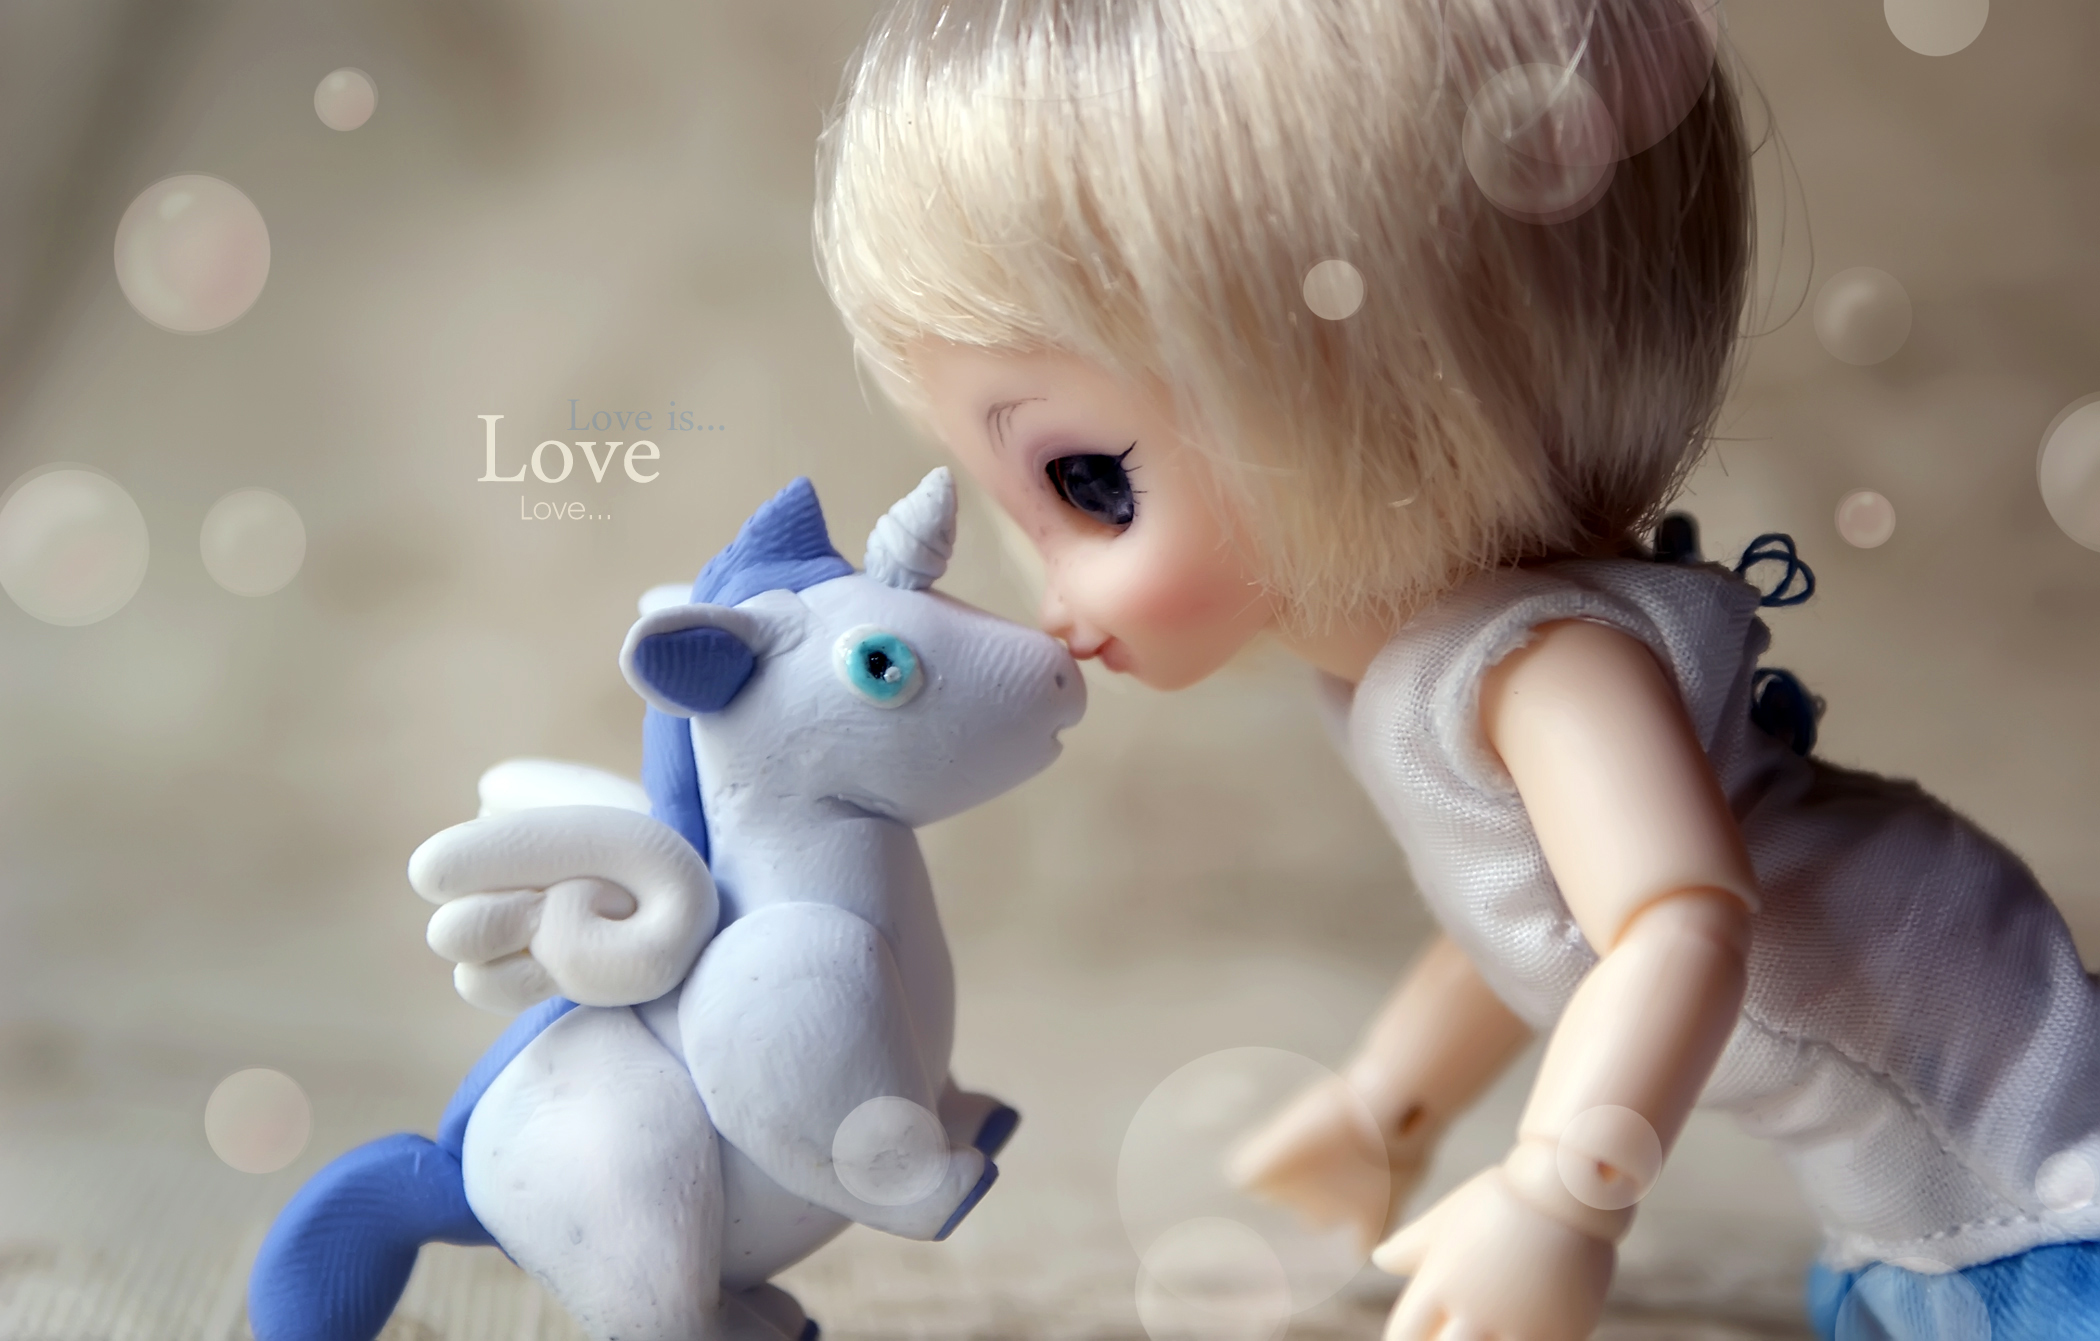 Unicorn Toy Kissing Baby Toy Wallpaper